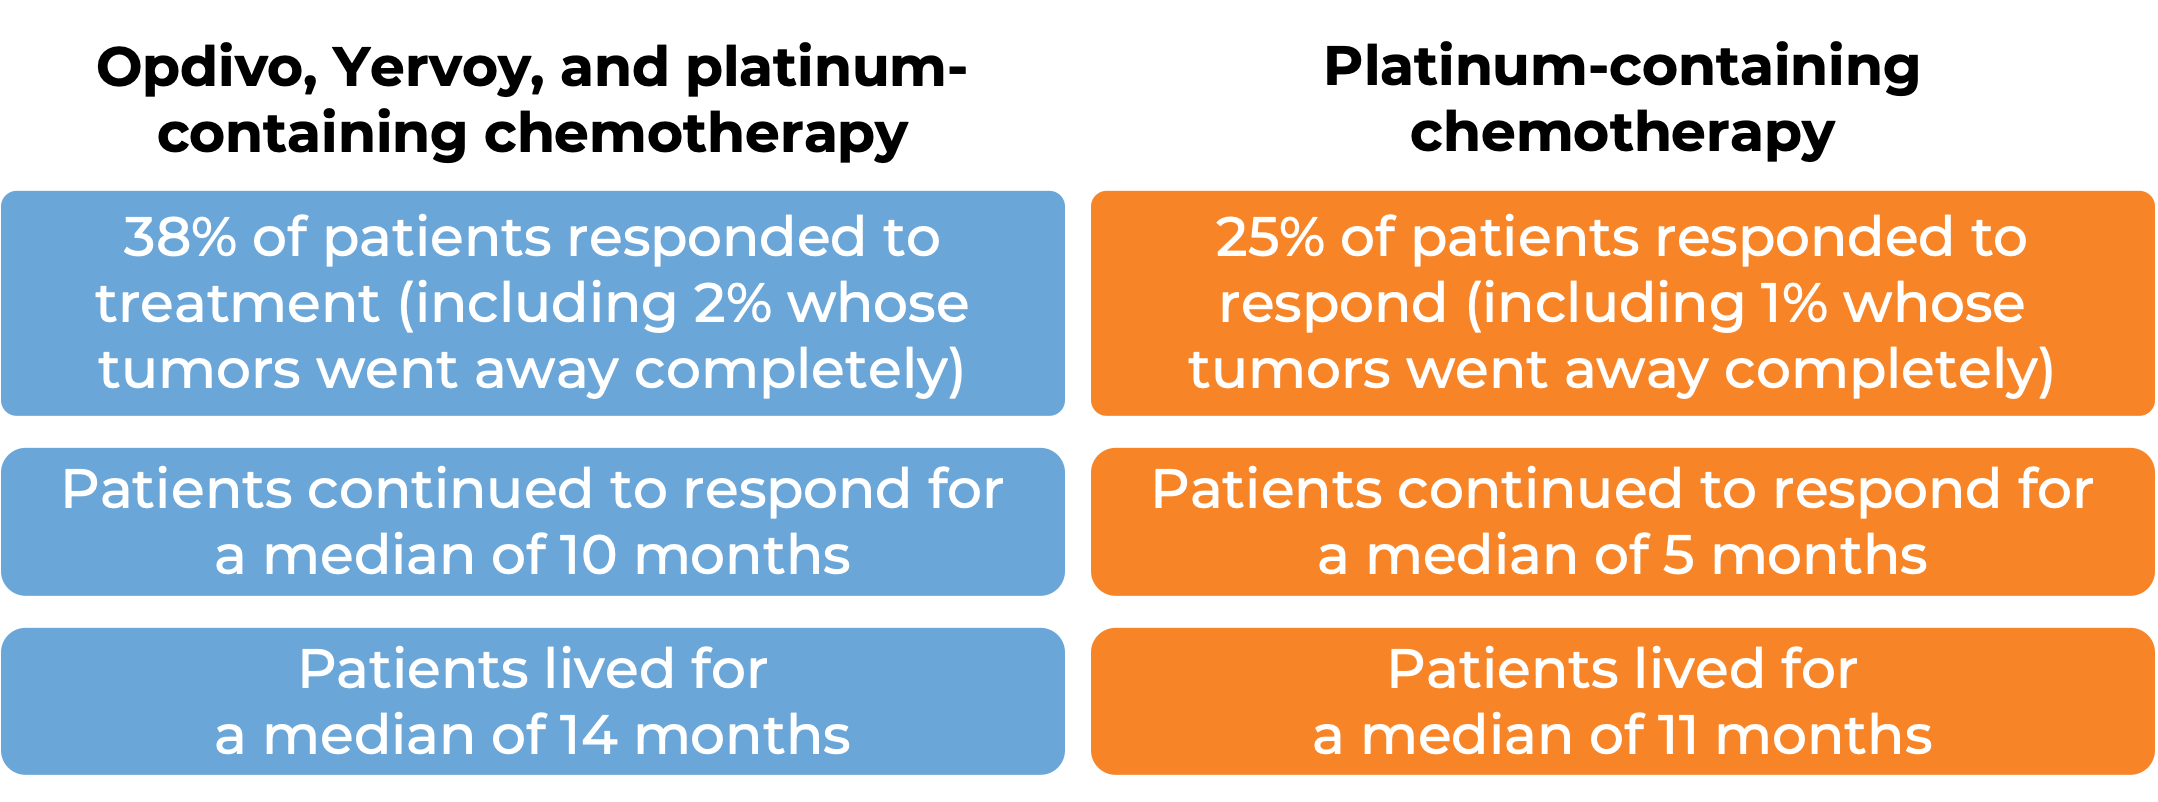 Comparative results after treatment with Opdivo, Yervoy, and chemo vs chemotherapy alone (diagram)